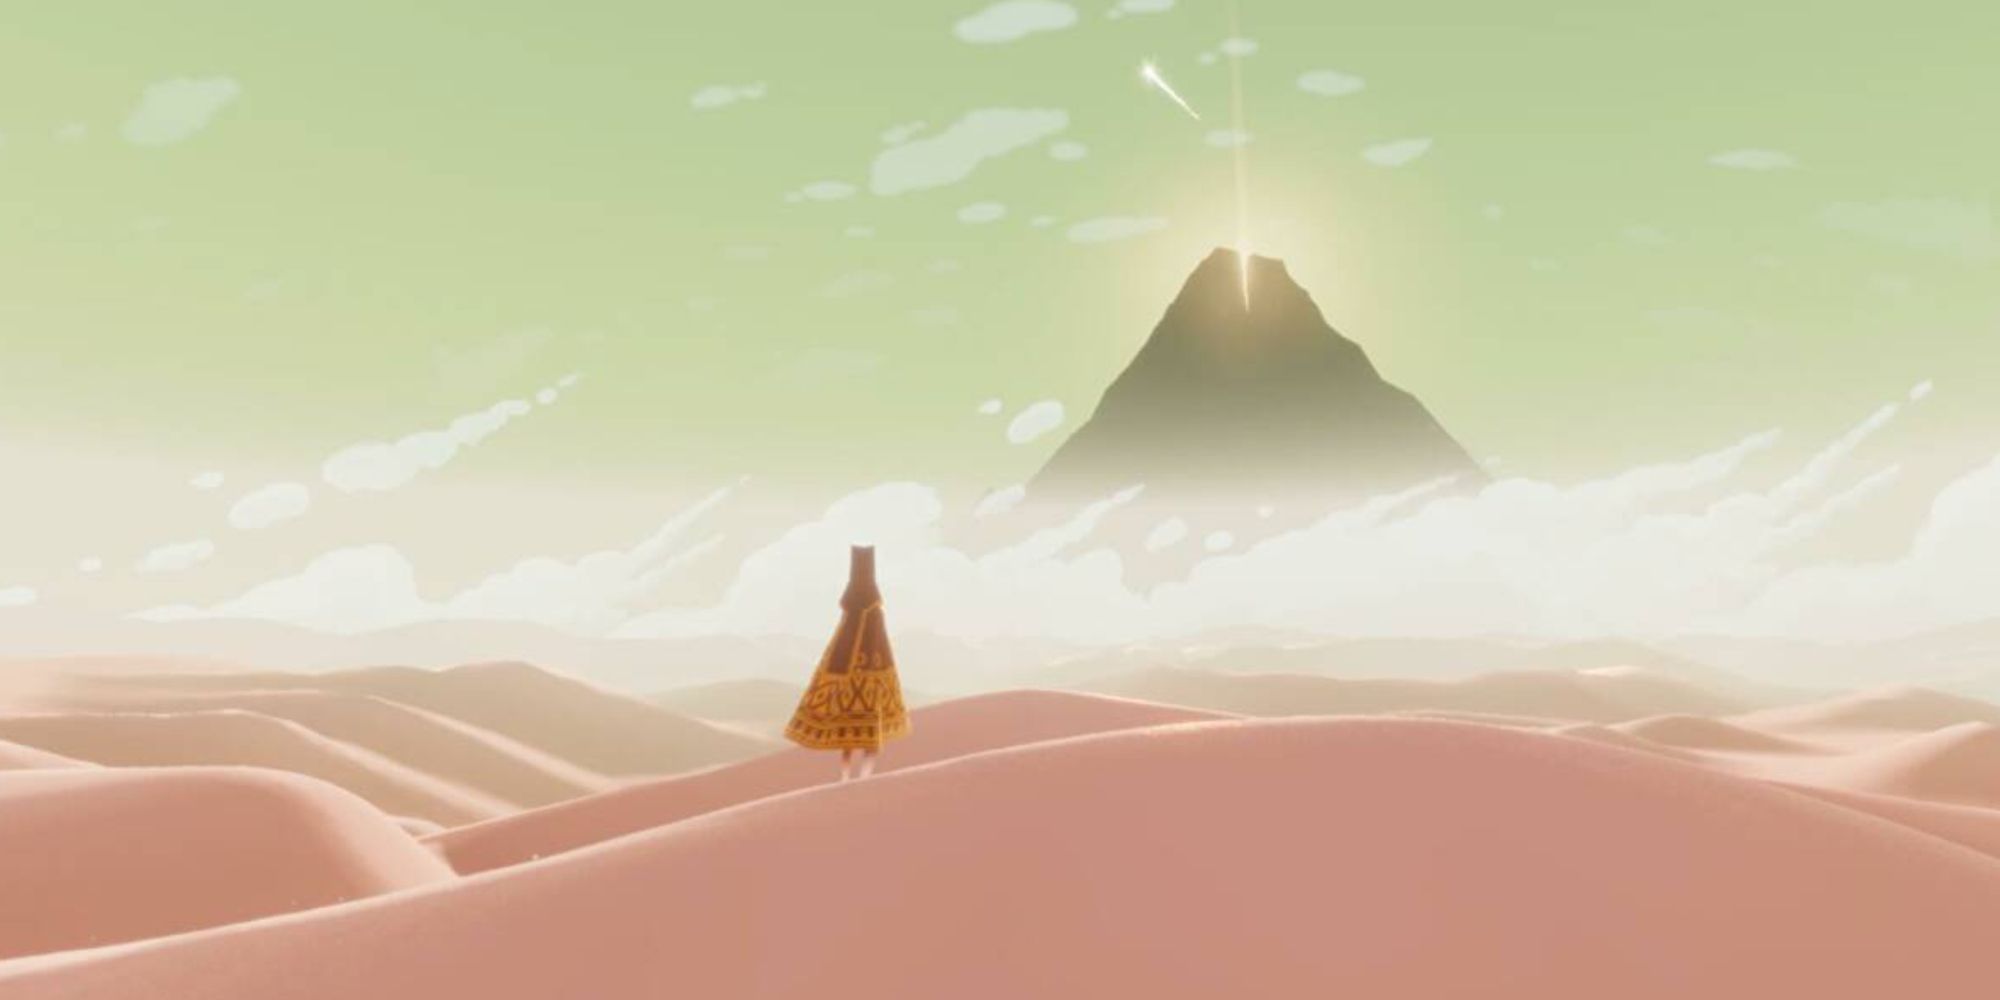 The Traveler looking at the mountain in the distance in the desert in Journey